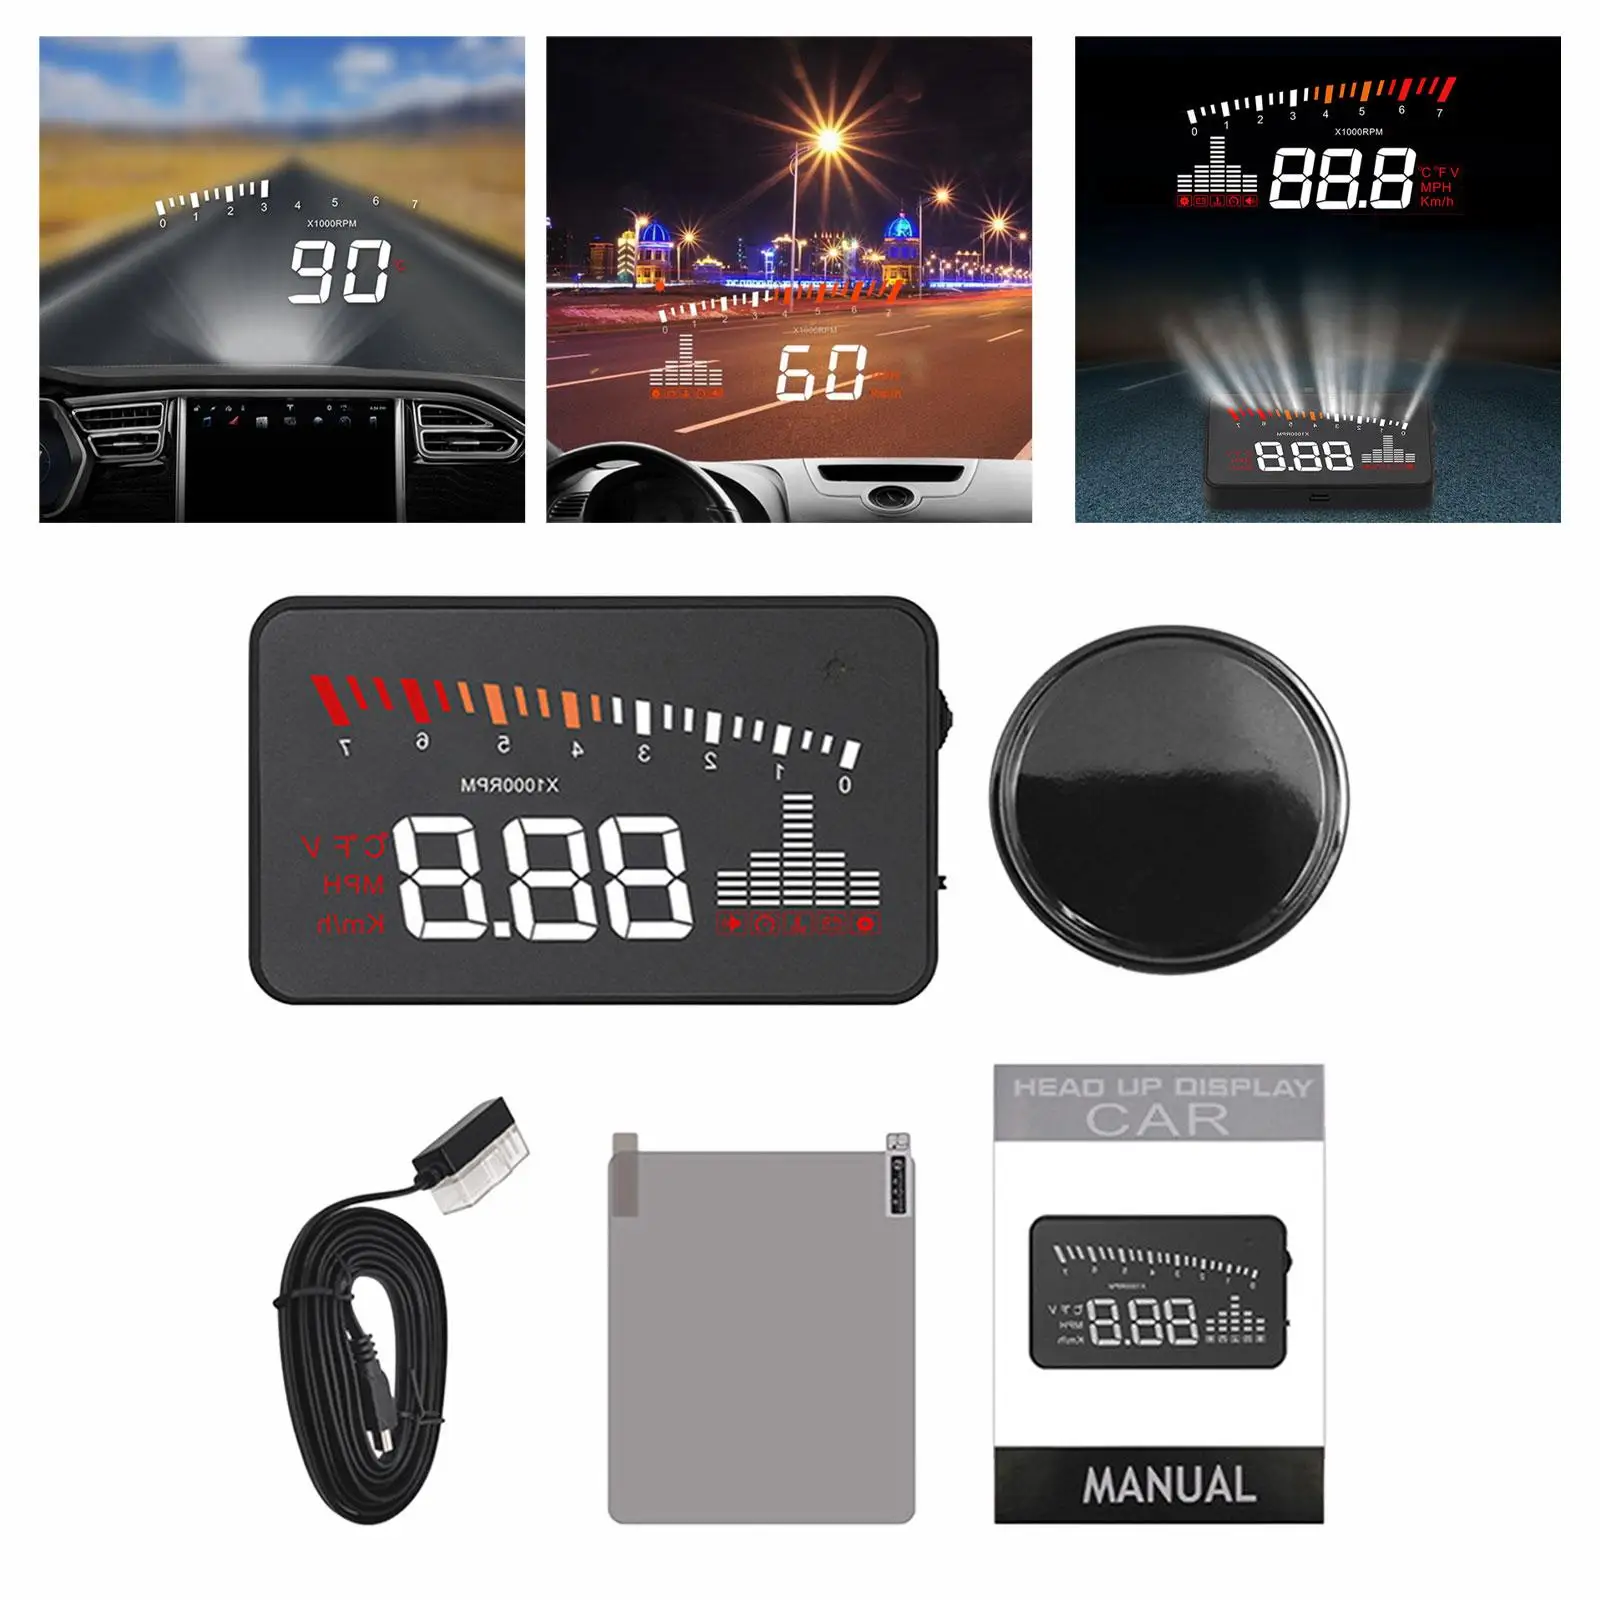 Car Heads up Display Windshield Projector LED Fatigue Driving Reminder 3.5inch Screen HUD Gauge Display